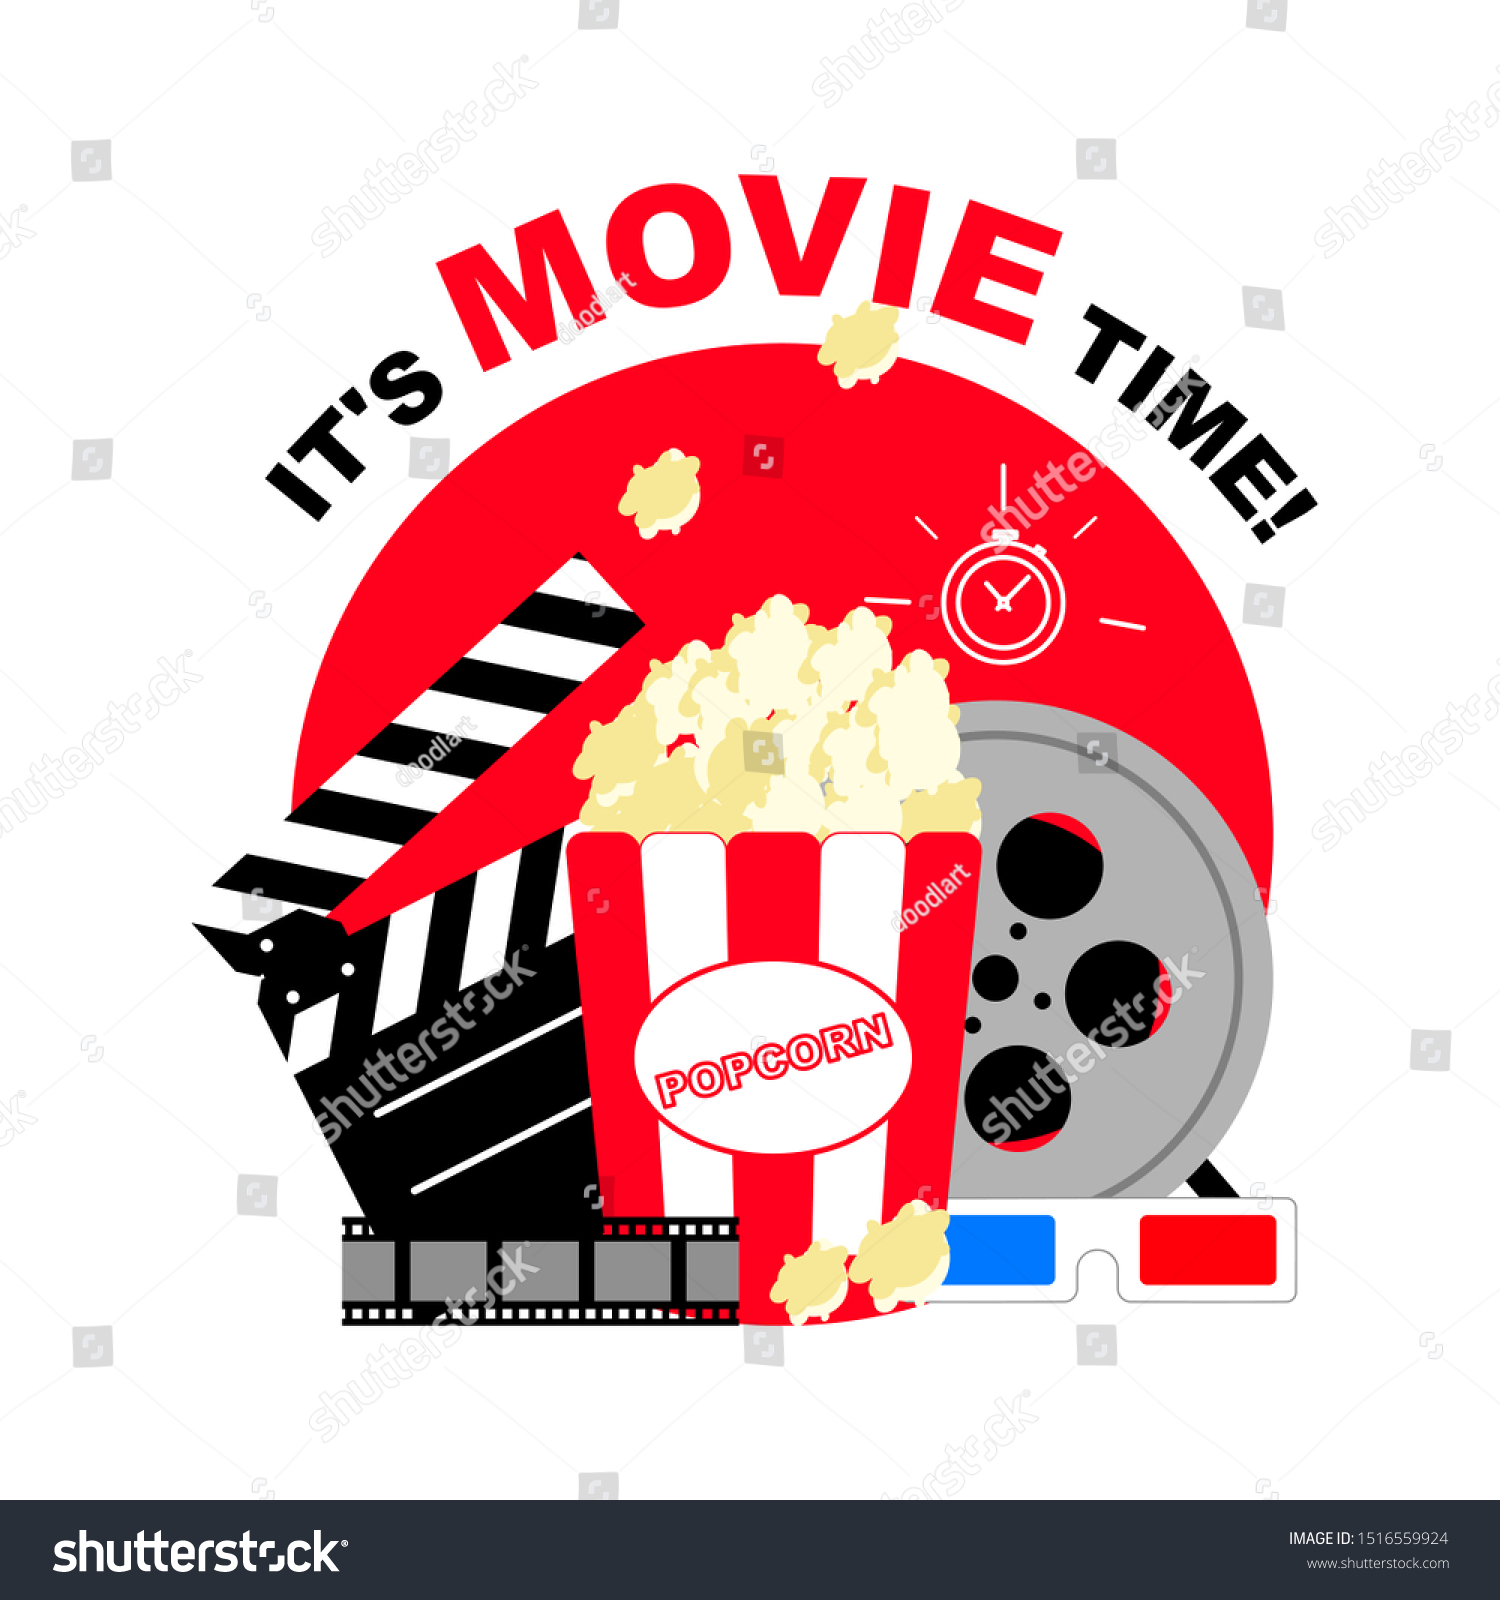 Movie Time Illustration Cinema Poster Concept Stock Vector Royalty Free 1516559924